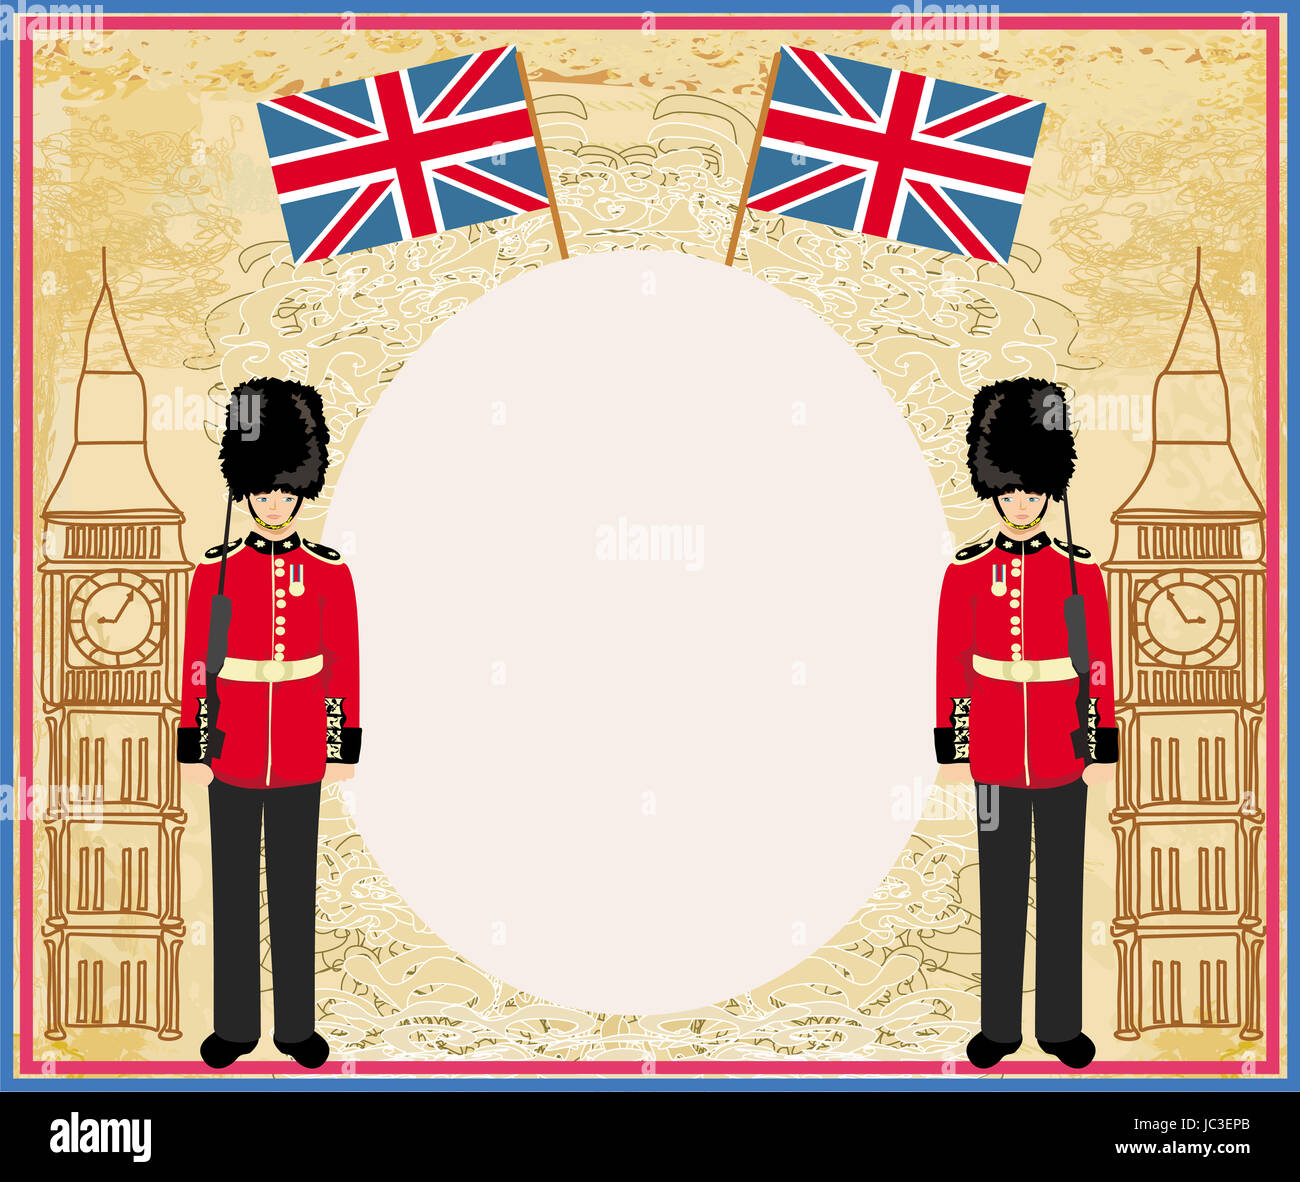 Abstract frame with a flag,Beefeater soldier and Big Ben Stock Photo